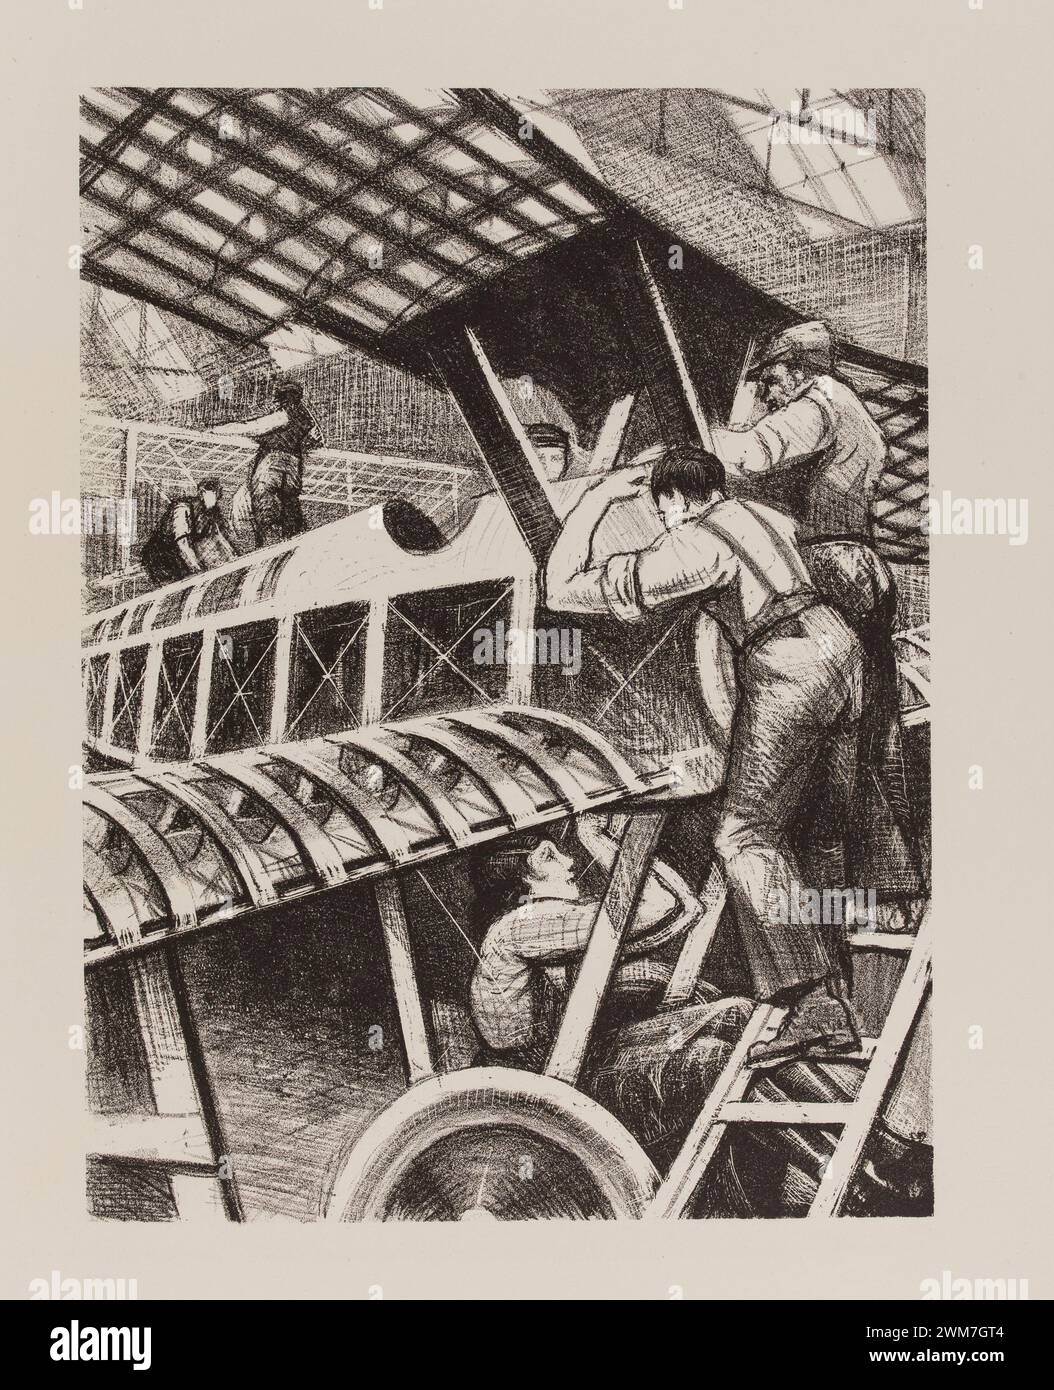 Plane assembly, from The Great War: Britain's Efforts and Ideals: Making Aircraft.  Print lithograph by C.R.W. (Christopher Richard Wynne) Nevinson., 1916 Stock Photo